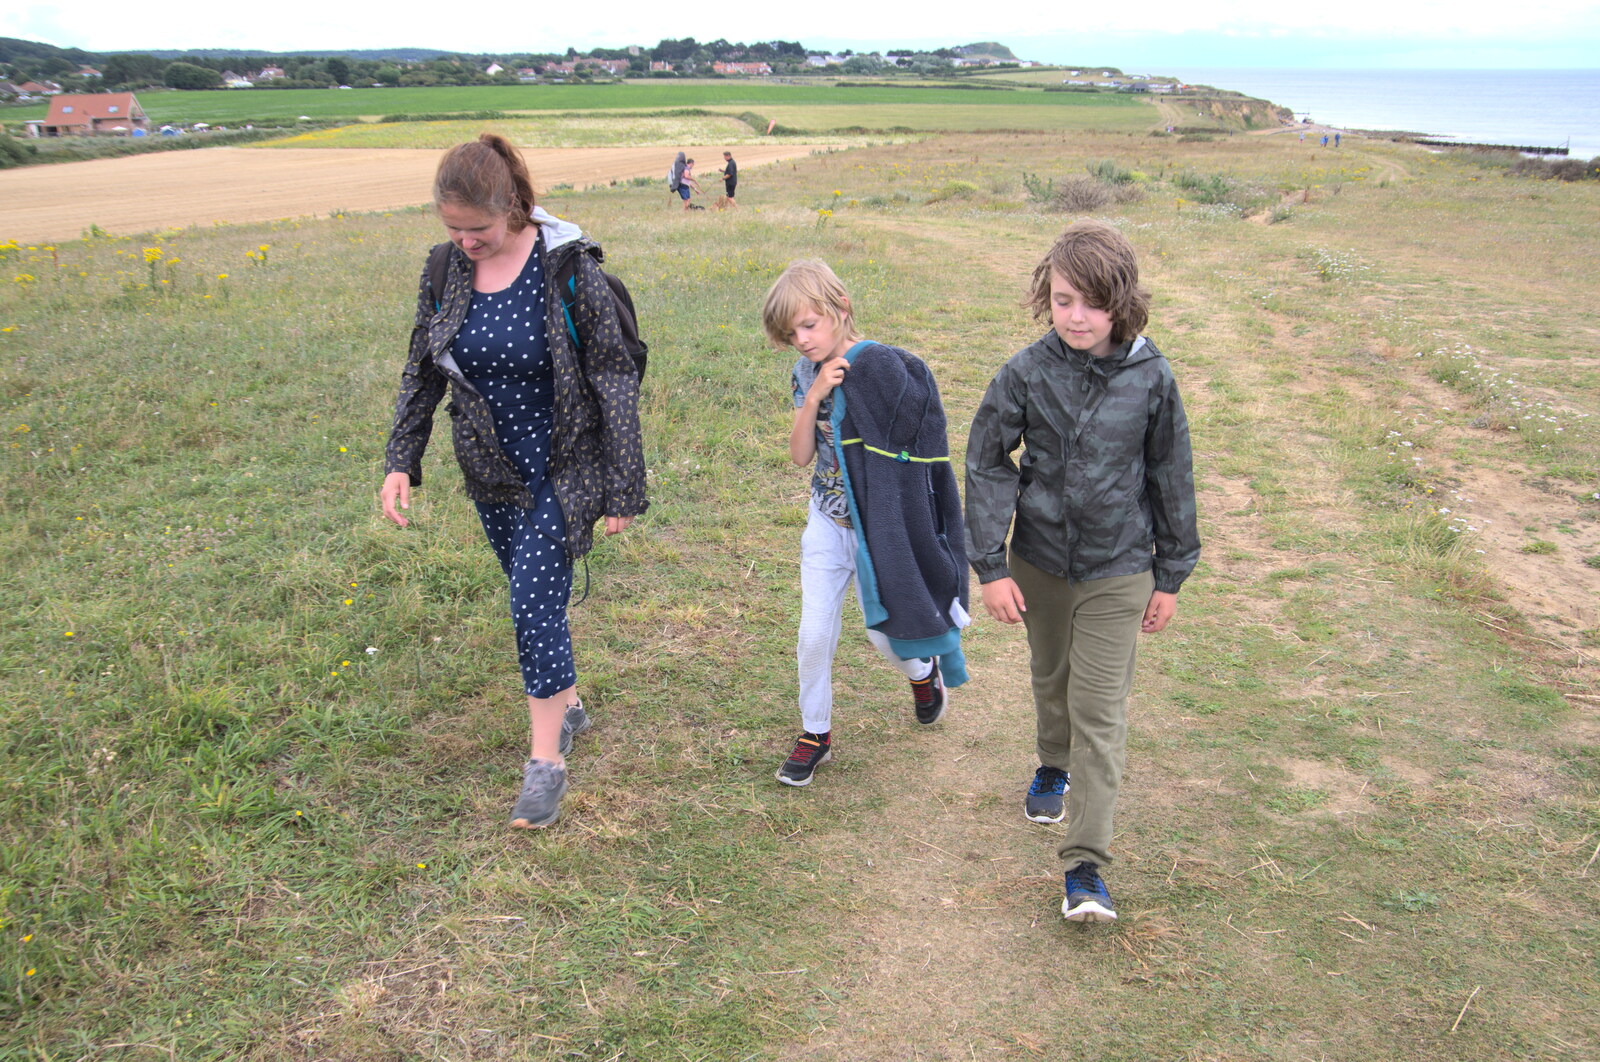 We walk back along the cliff path from Camping on the Coast, East Runton, North Norfolk - 25th July 2020